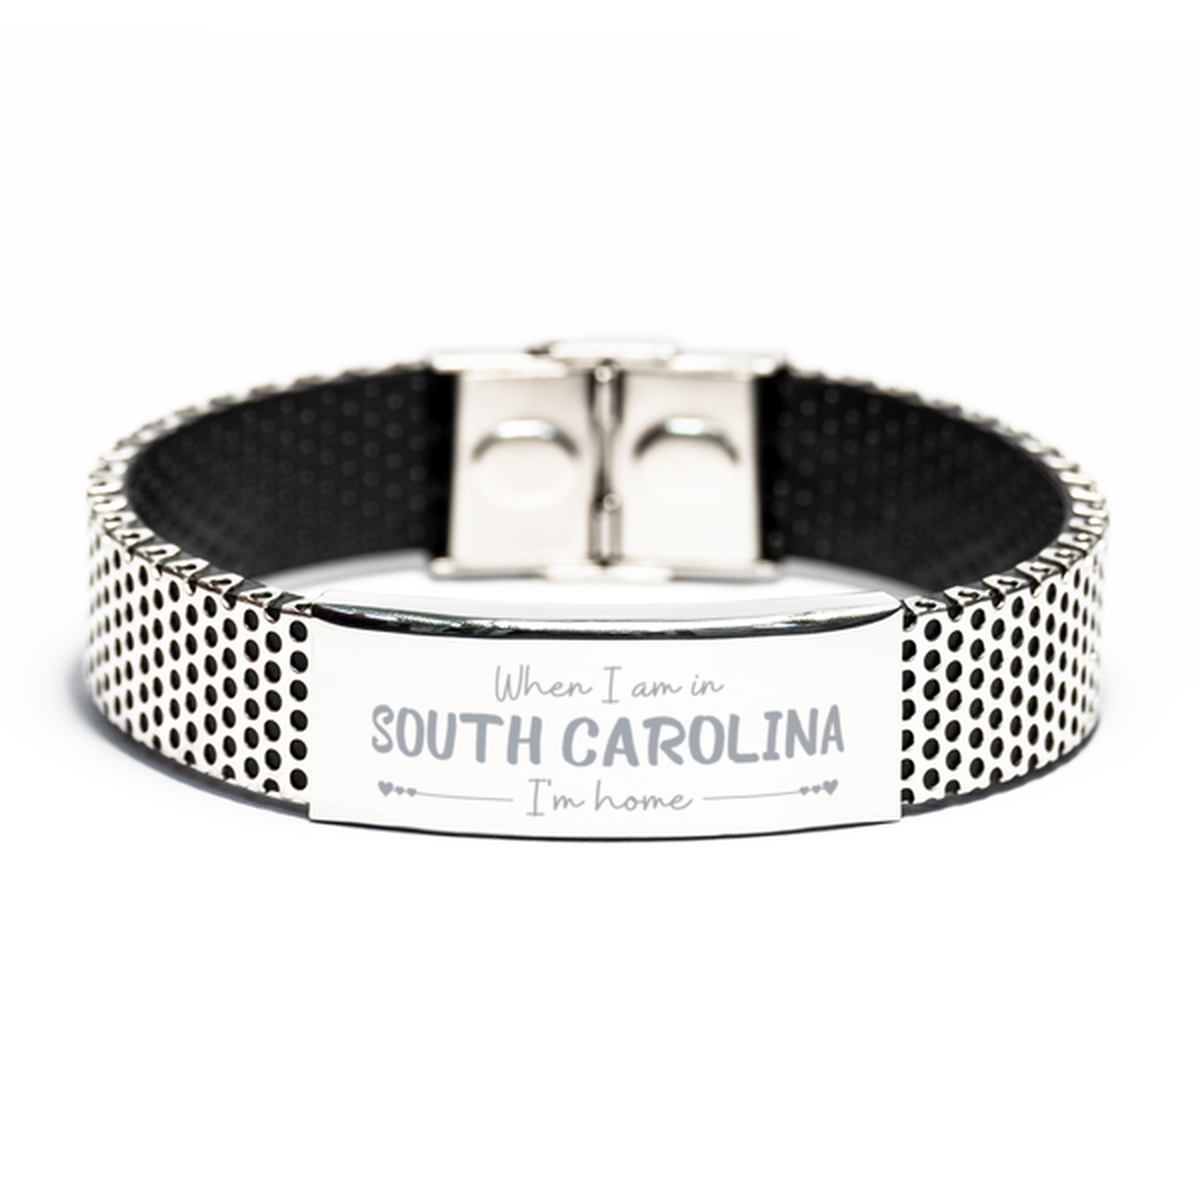 When I am in South Carolina I'm home Stainless Steel Bracelet, Cheap Gifts For South Carolina, State South Carolina Birthday Gifts for Friends Coworker